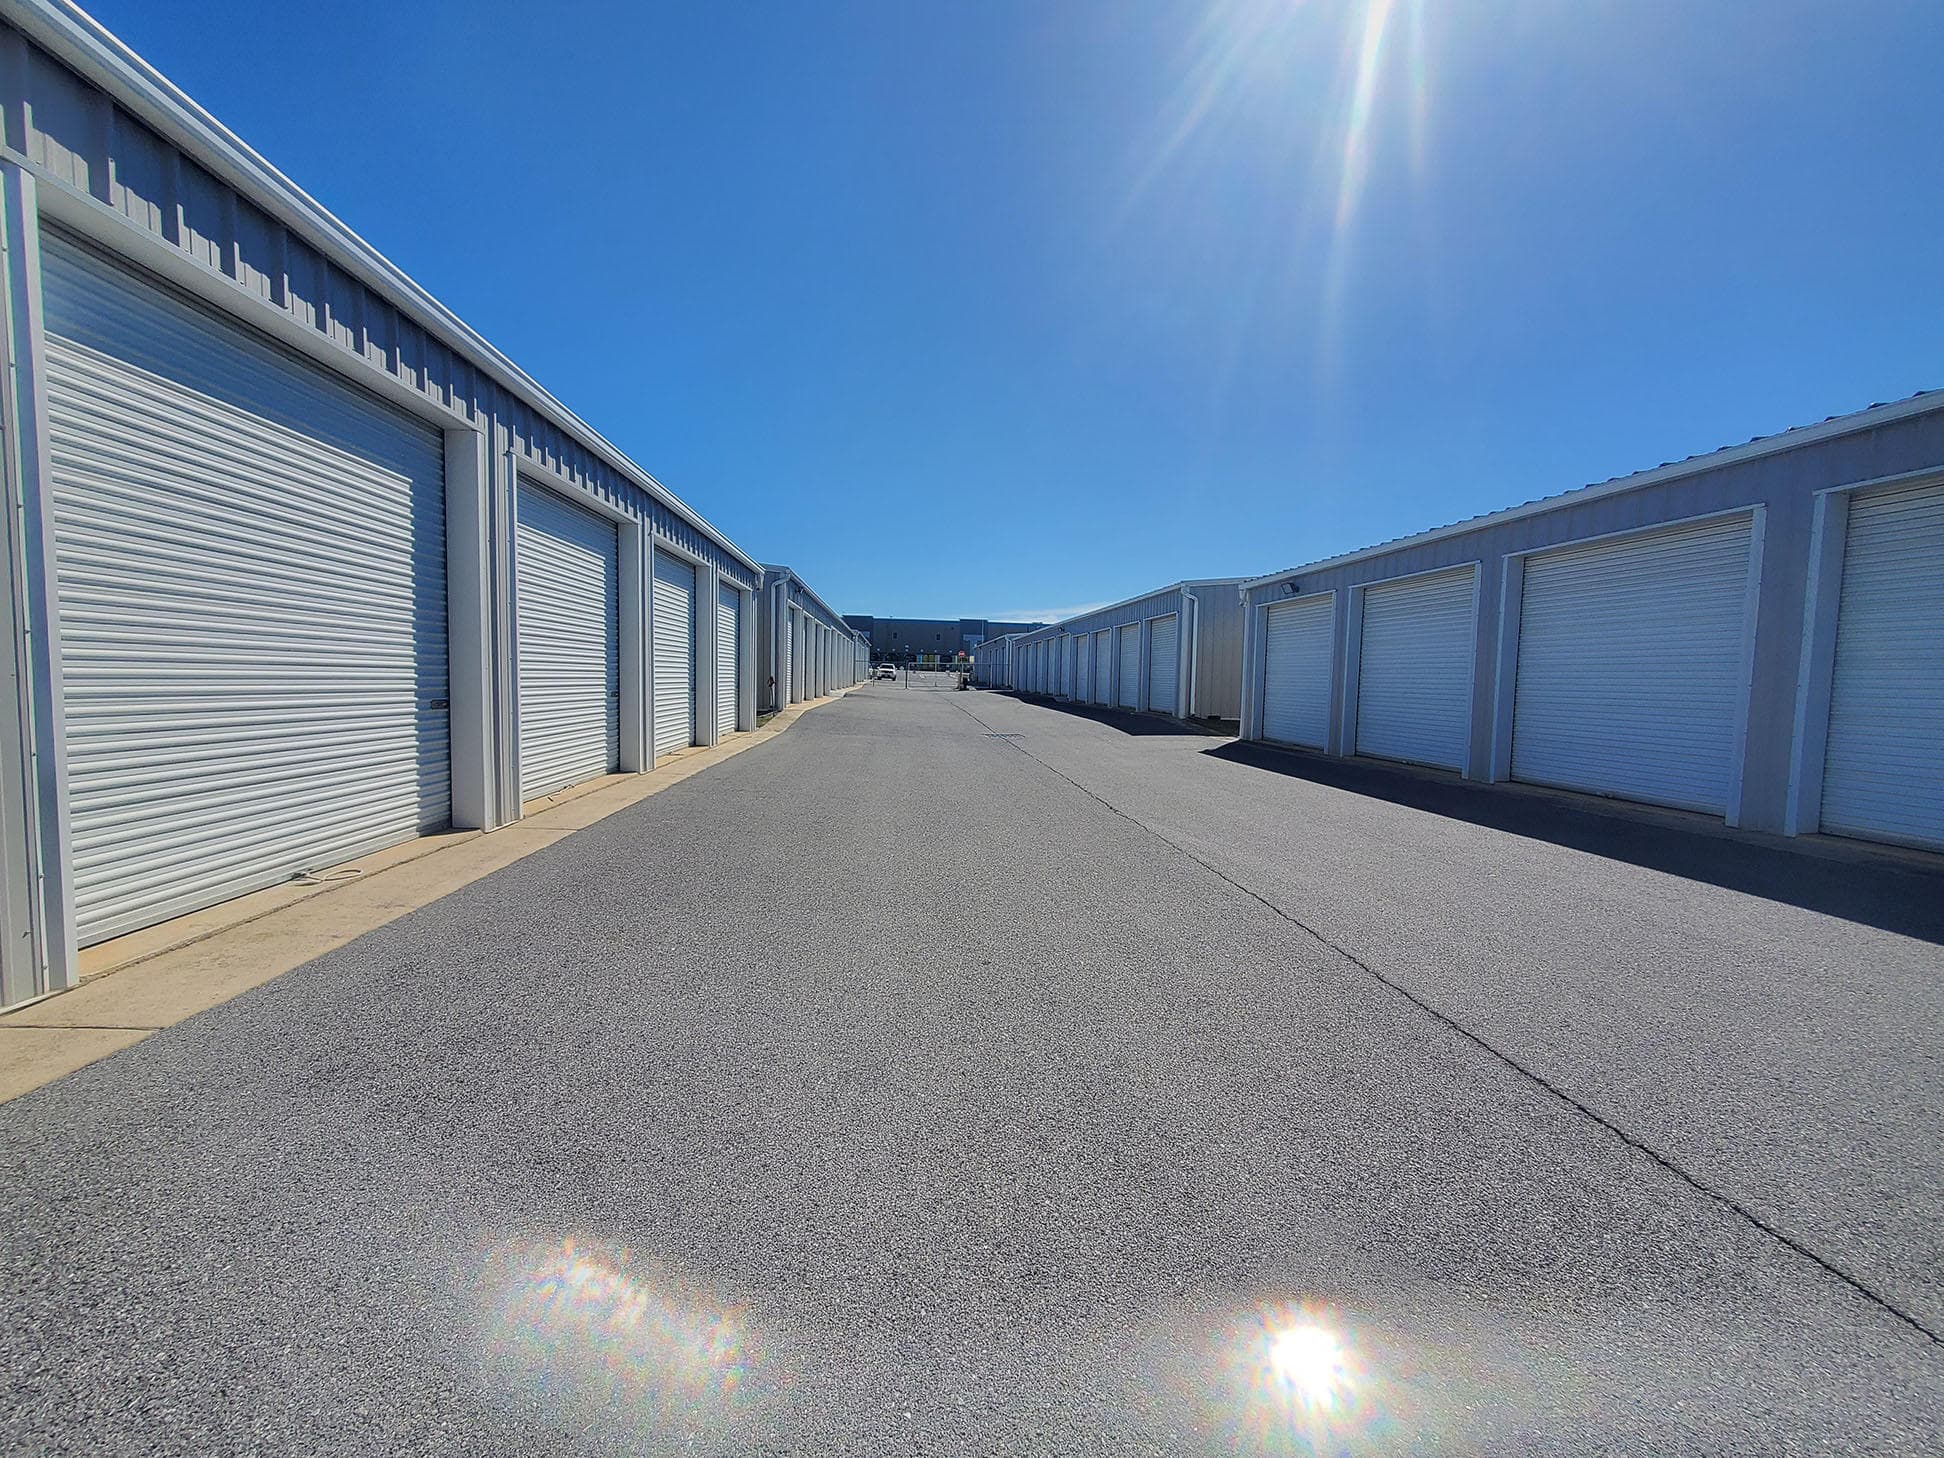 Valley Storage - Hagerstown, MD, US, climate controlled